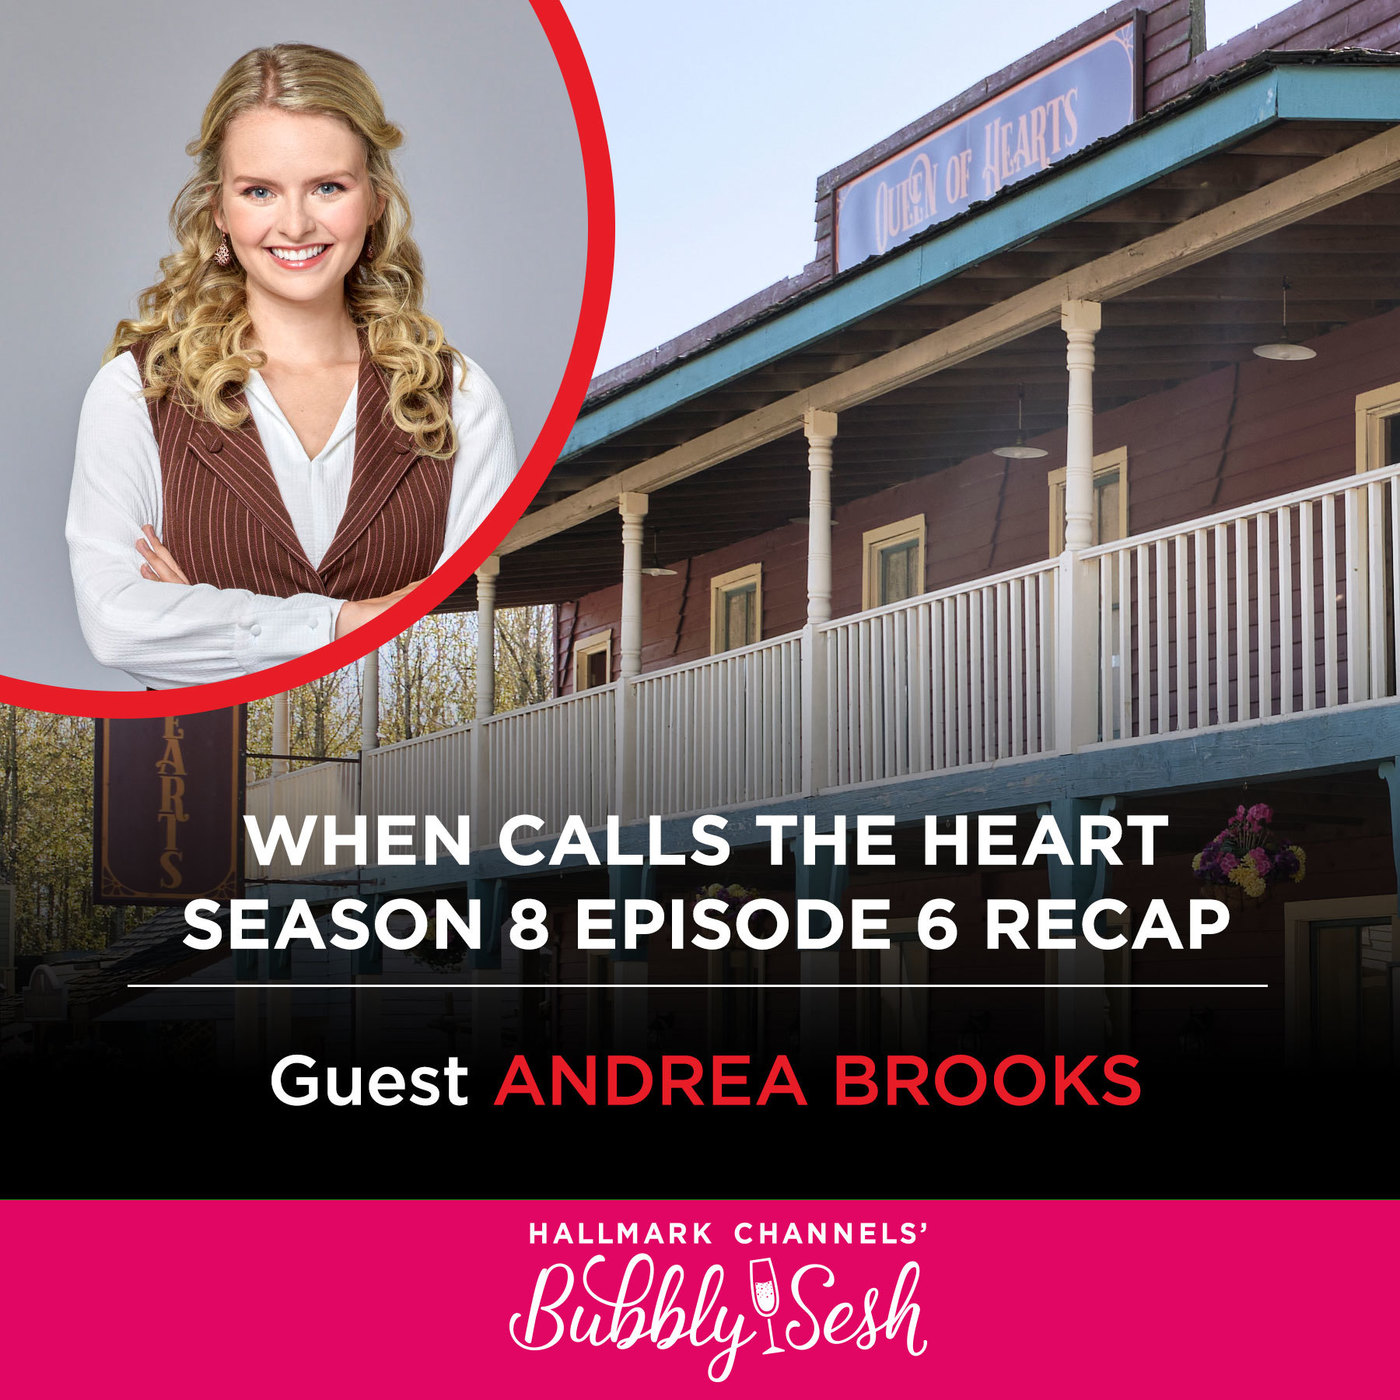 When Calls the Heart S8 Ep6 Recap with Guest Andrea Brooks